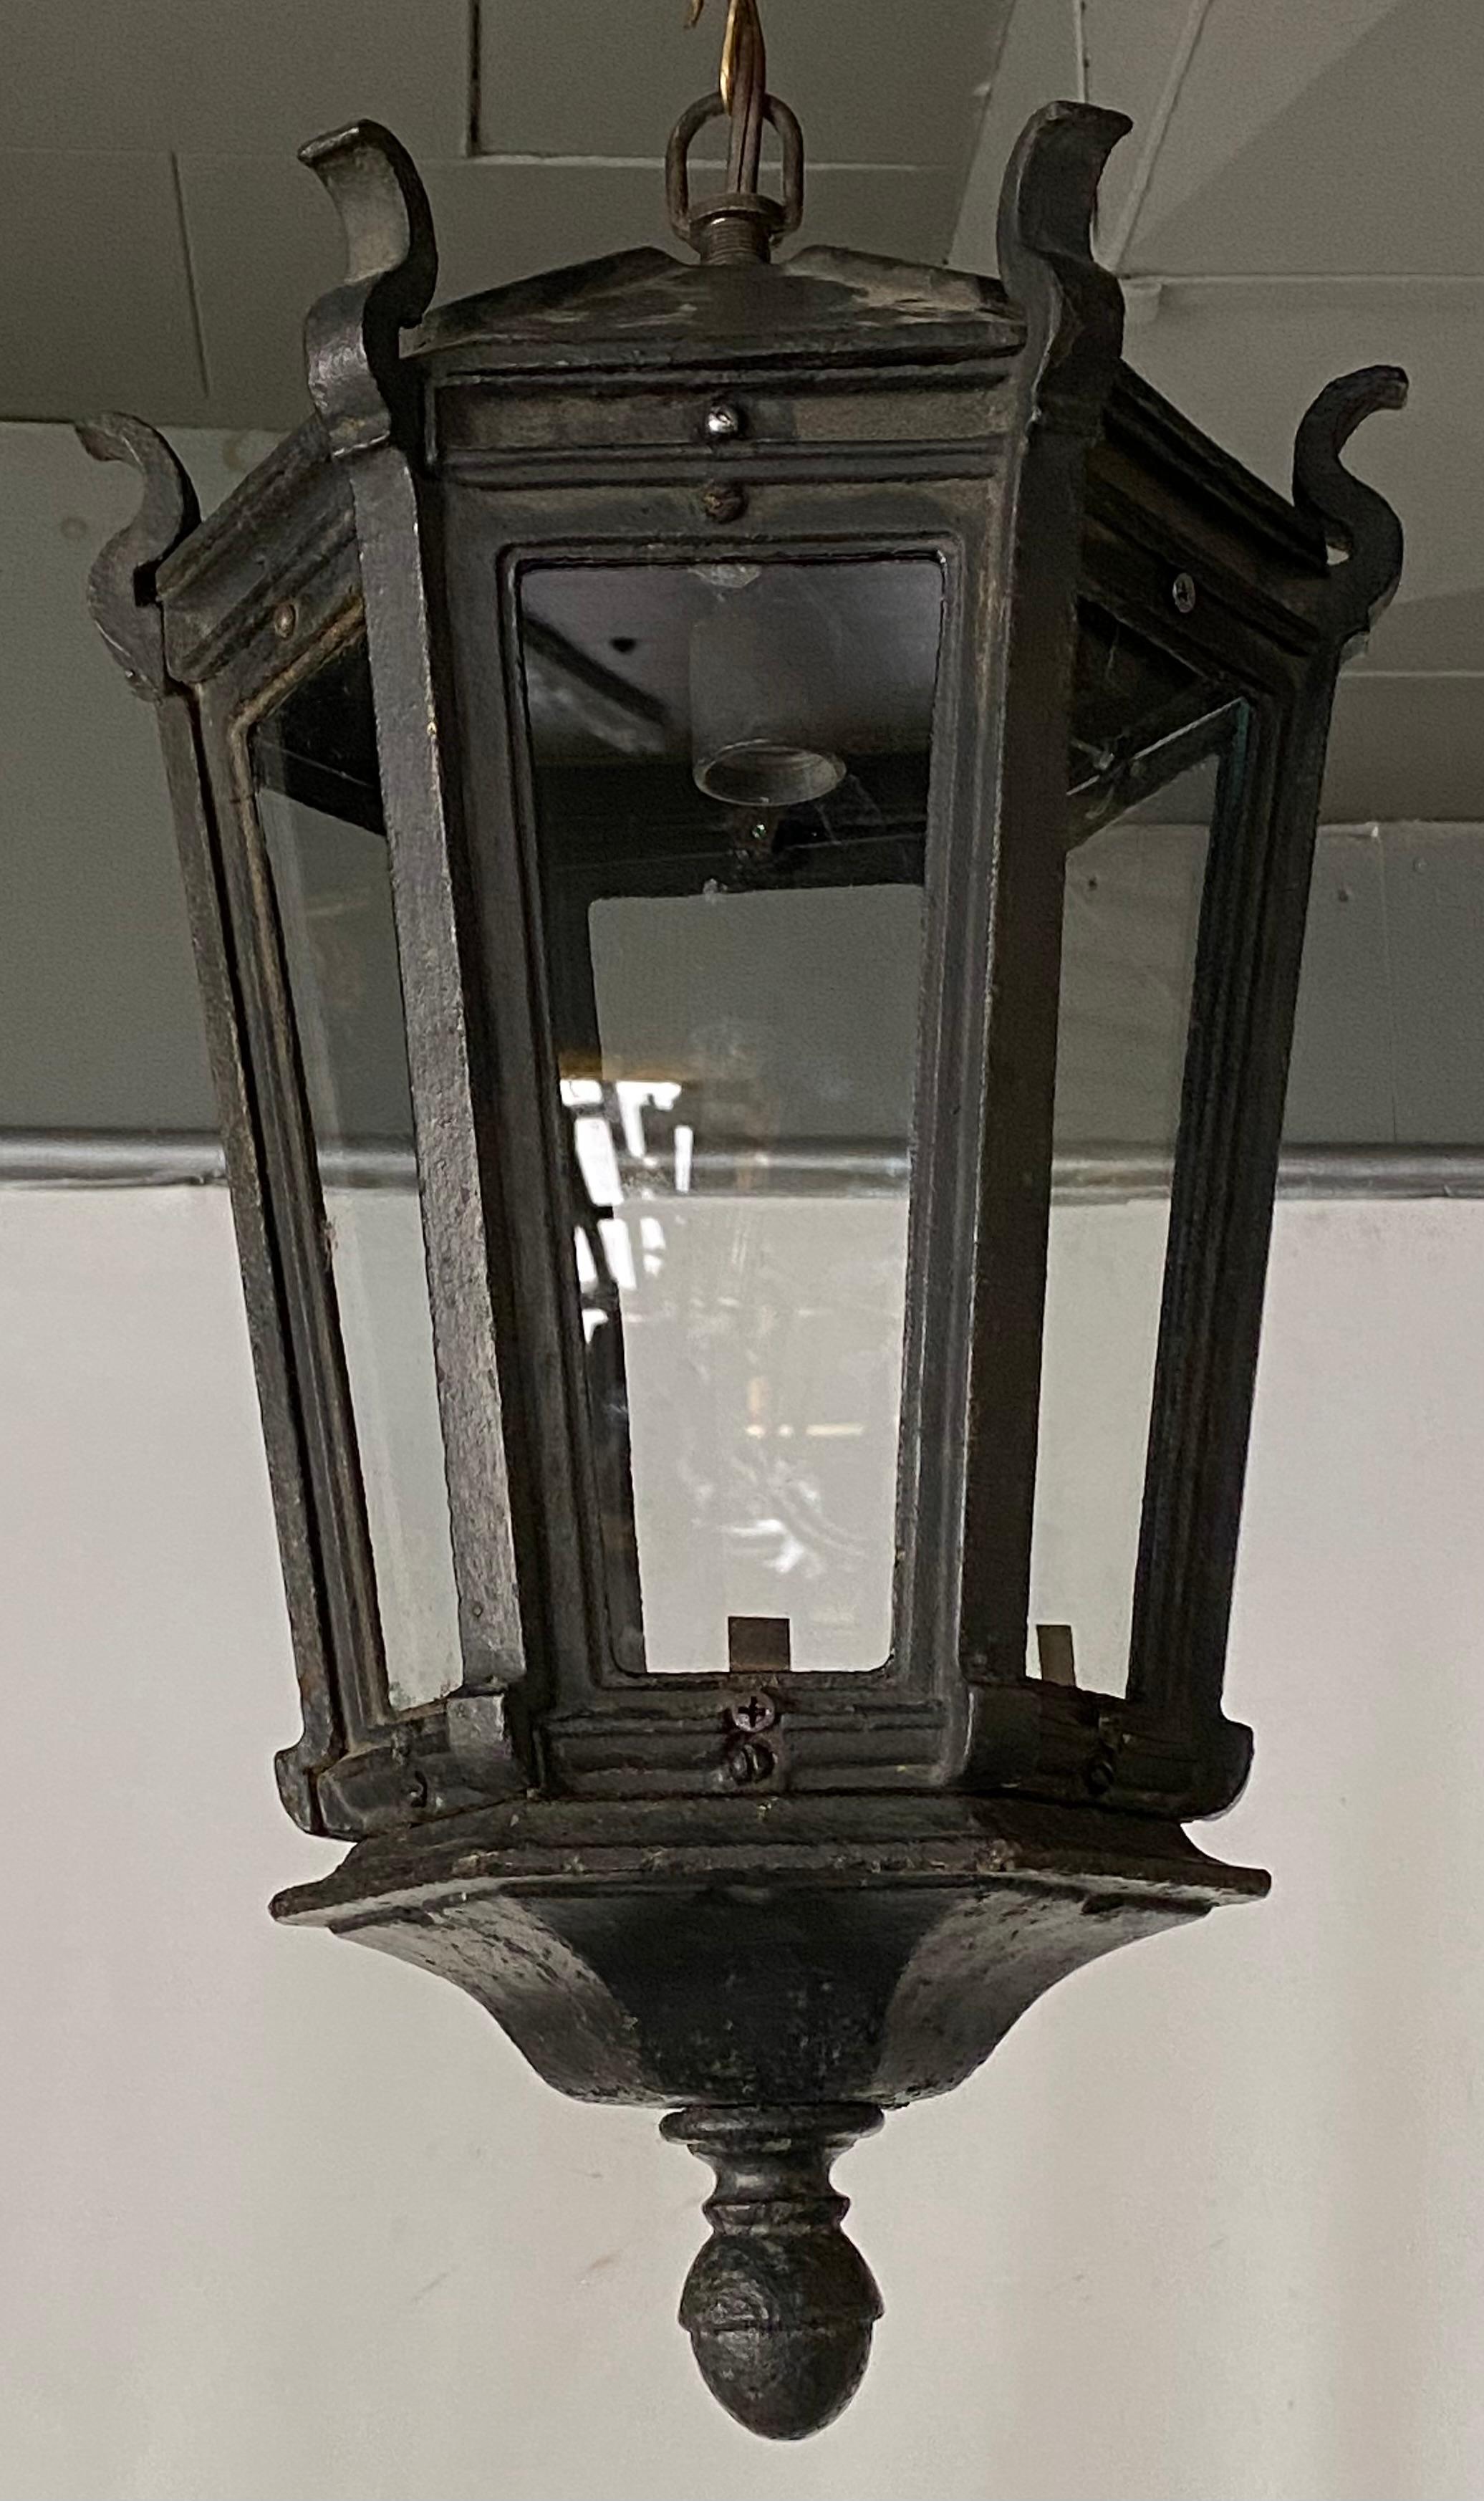 Handsome and impressive iron ceiling hanging lantern with great aged patina for either interior or exterior lighting. The shaped crown top leads down to a hexagonal body with glass panels.
Chandelier, pendant light, hanging lantern.